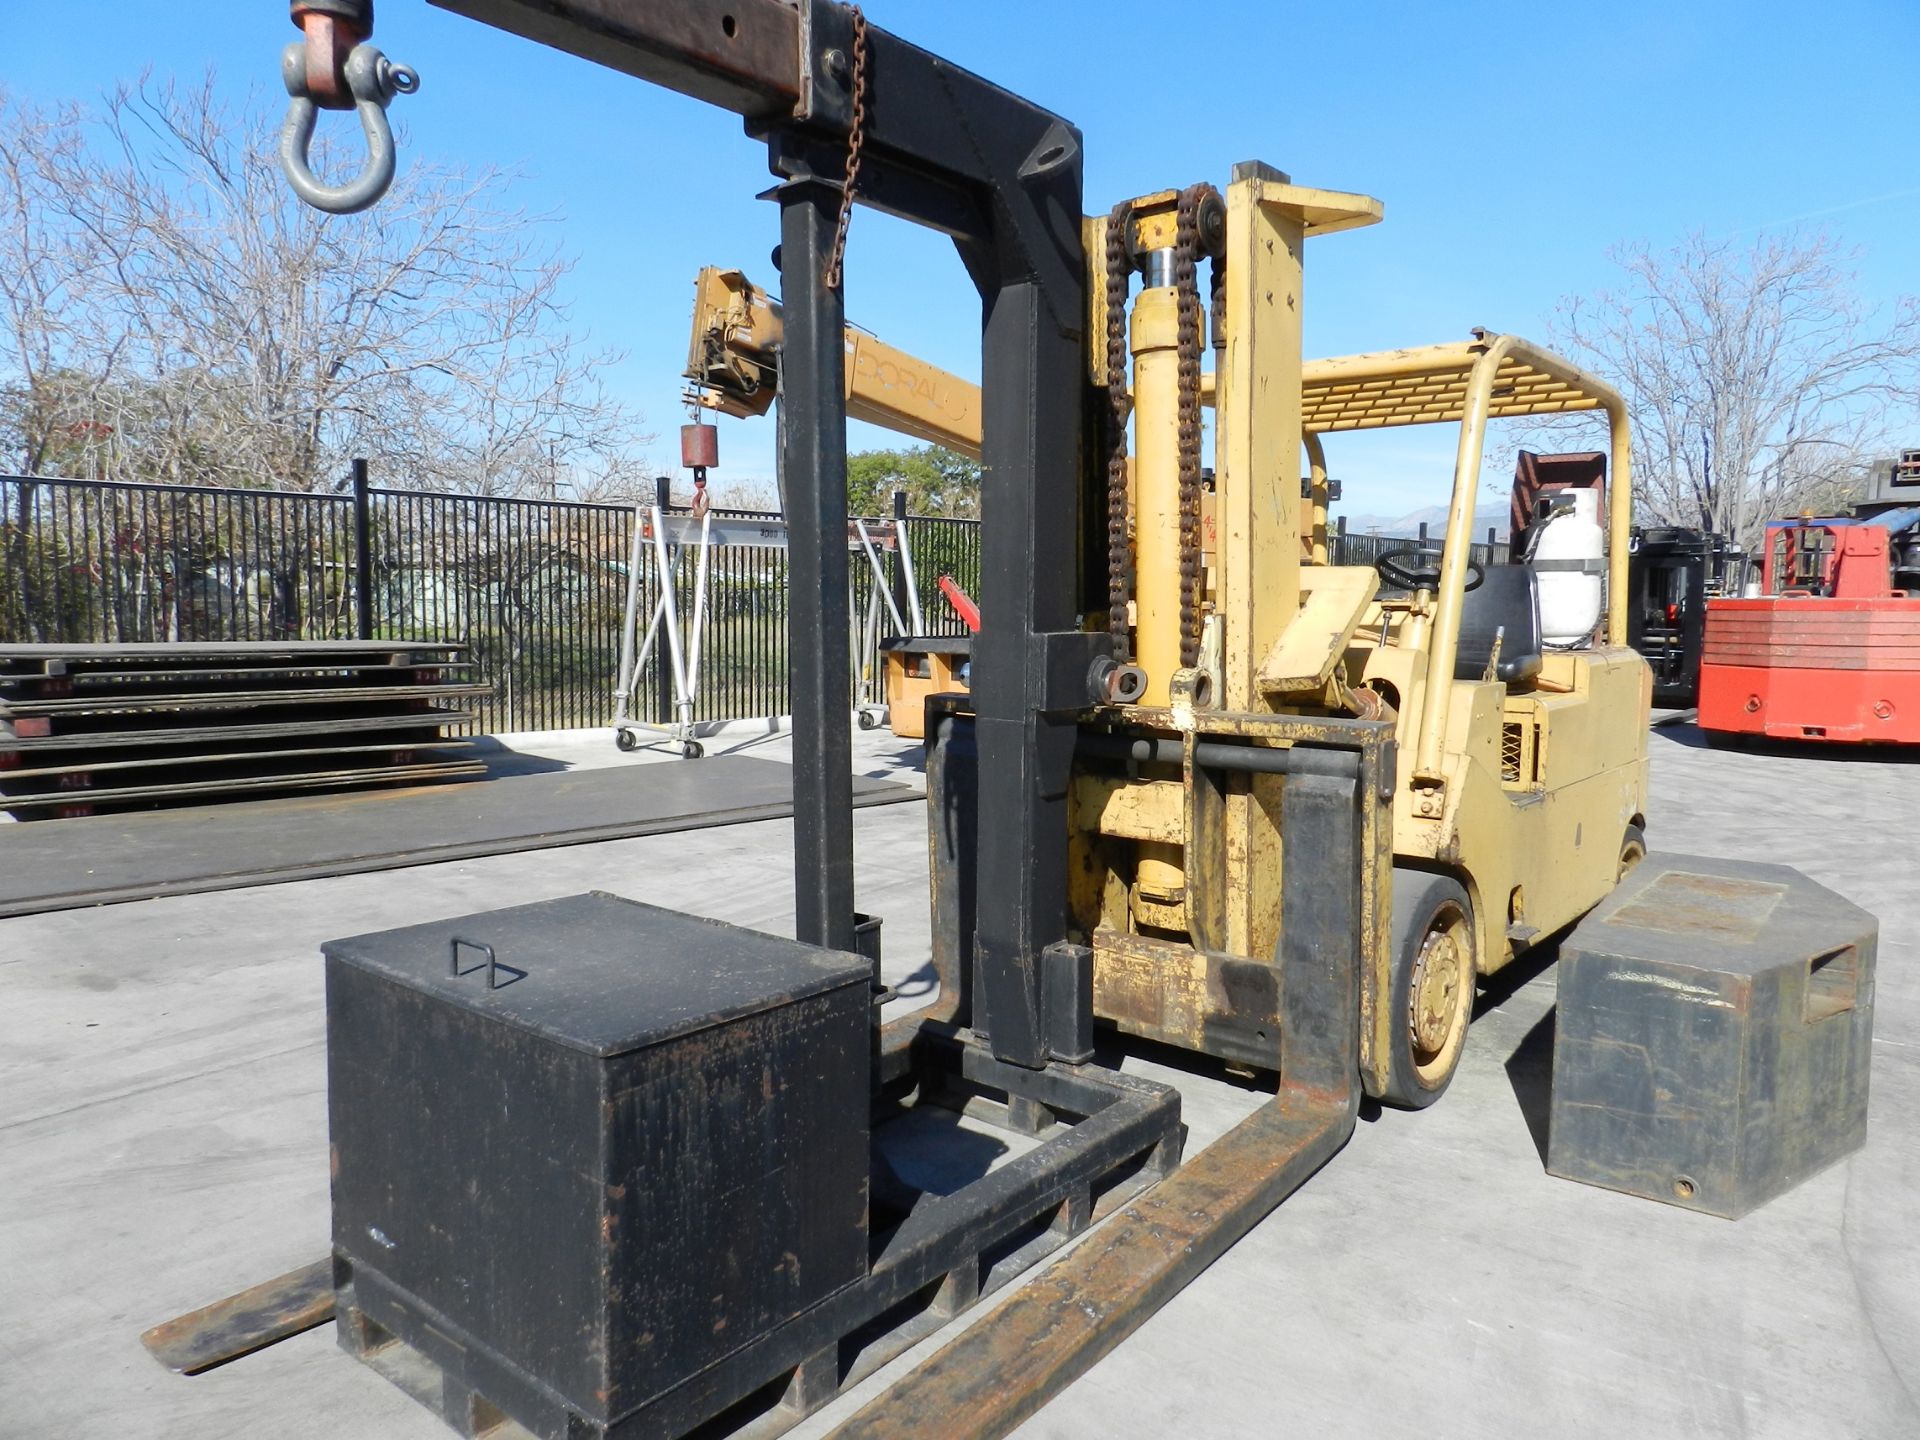 CATERPILLAR T 300 LPG FORKLIFT, 30,000 LB CAPACITY, CUSHION TIRES, BOOM ATTACHMENT WITH STAND, - Image 21 of 21